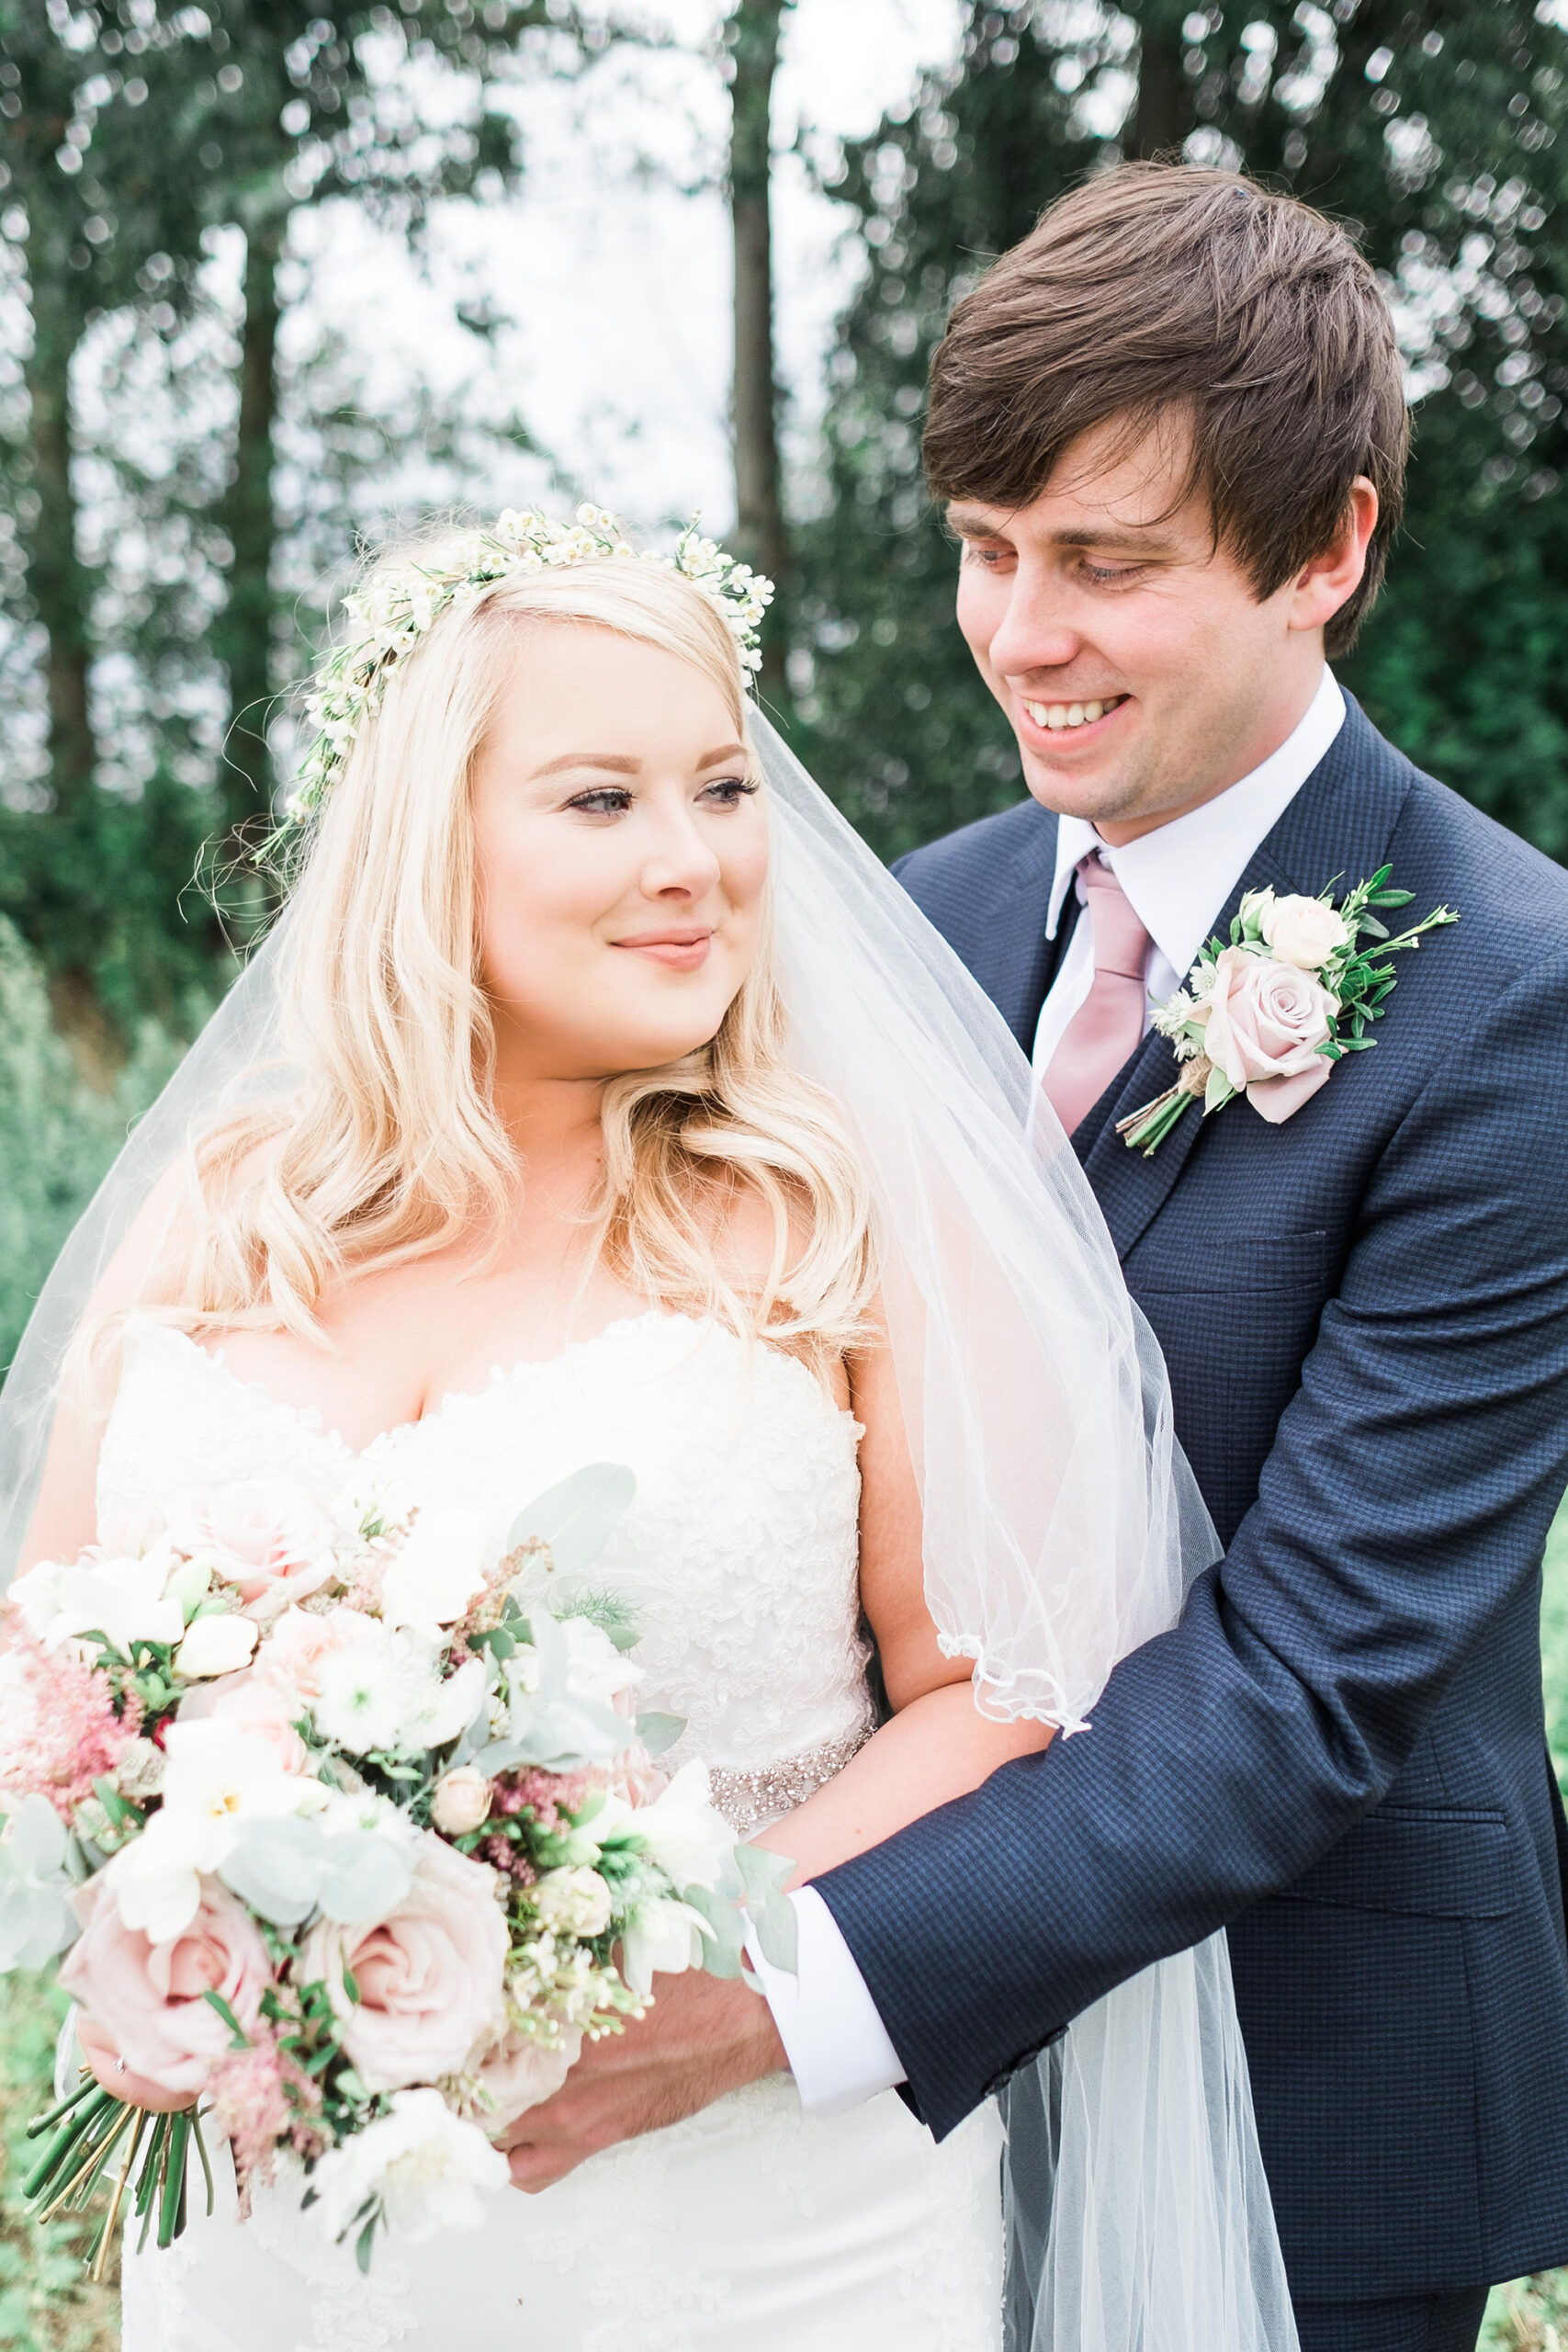 Harriet_Mark_Relaxed-Country-Wedding_Joanna-Briggs-Photography_033